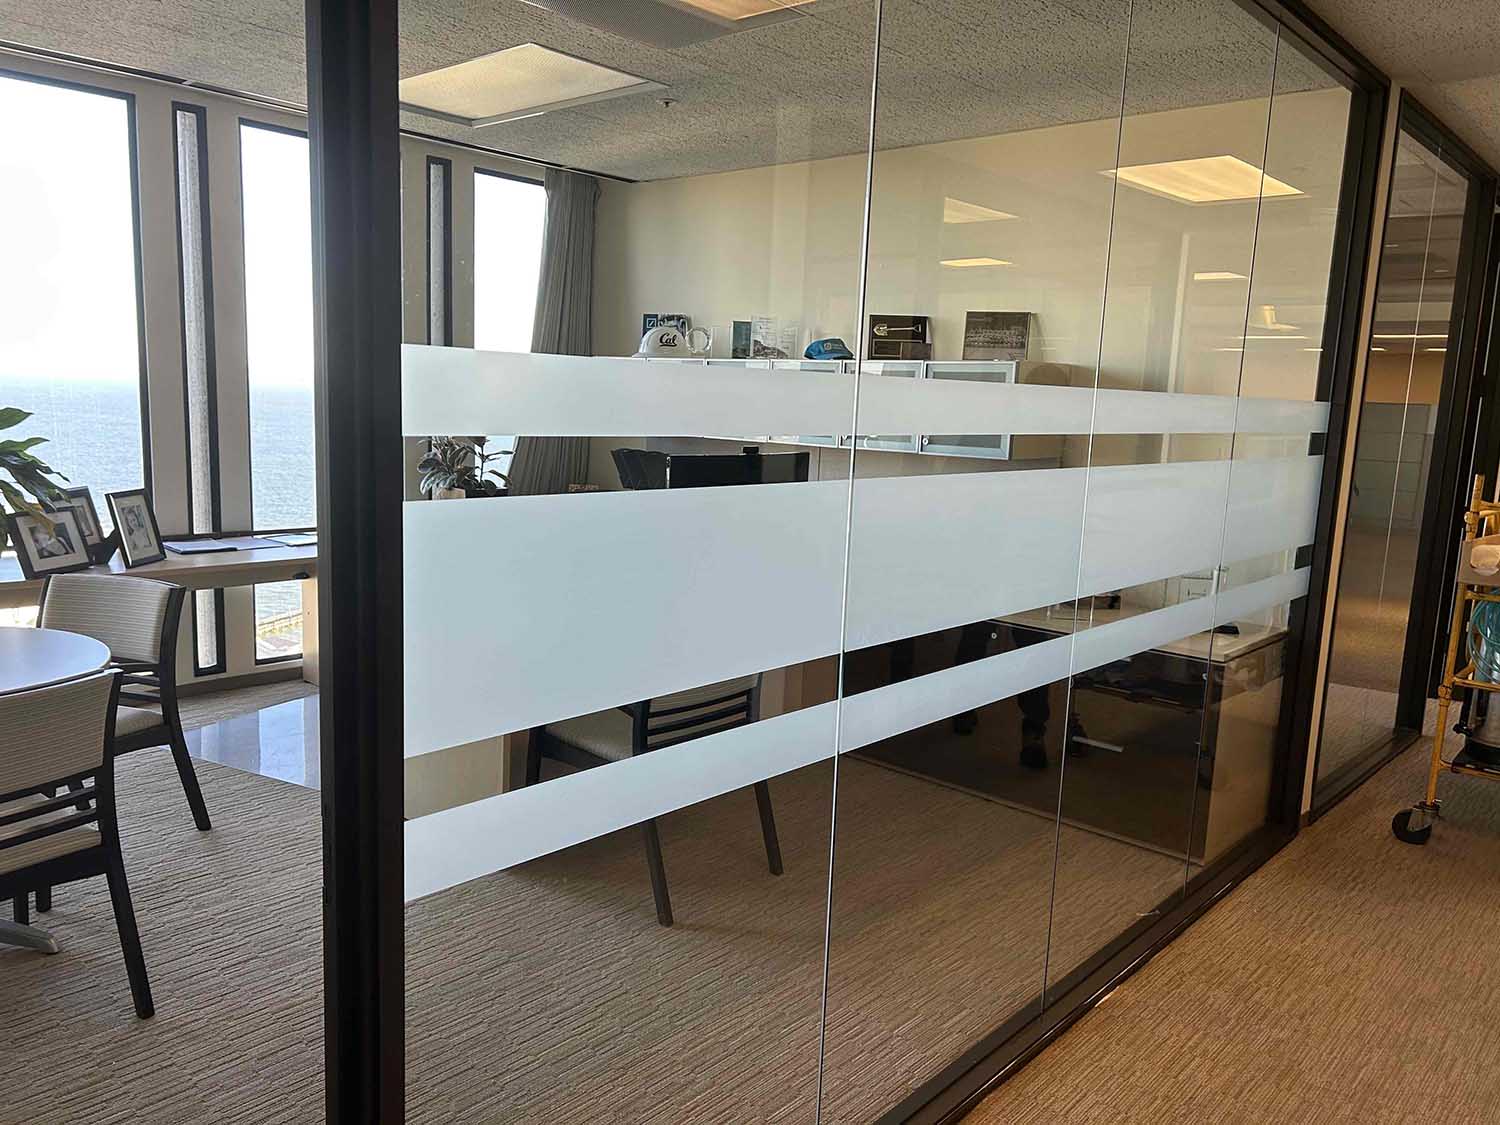 How To Get Decorative Window Film for Your San Francisco Office. Get a free estimate from ClimatePro in the Bay Area.